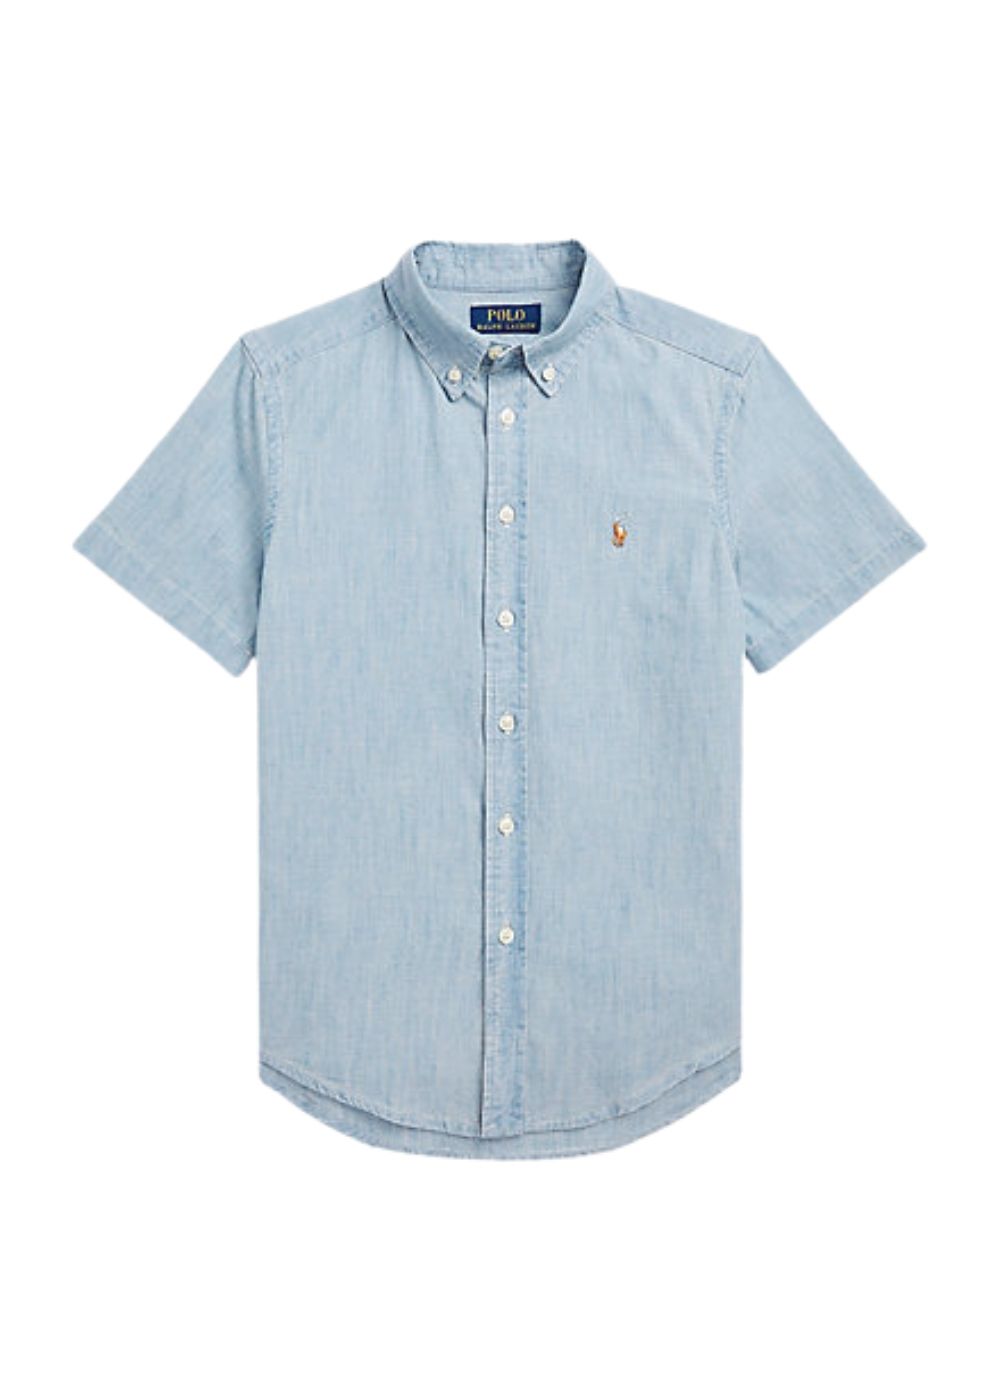 Featured image for “Polo Ralph Lauren Camicia In cotone”